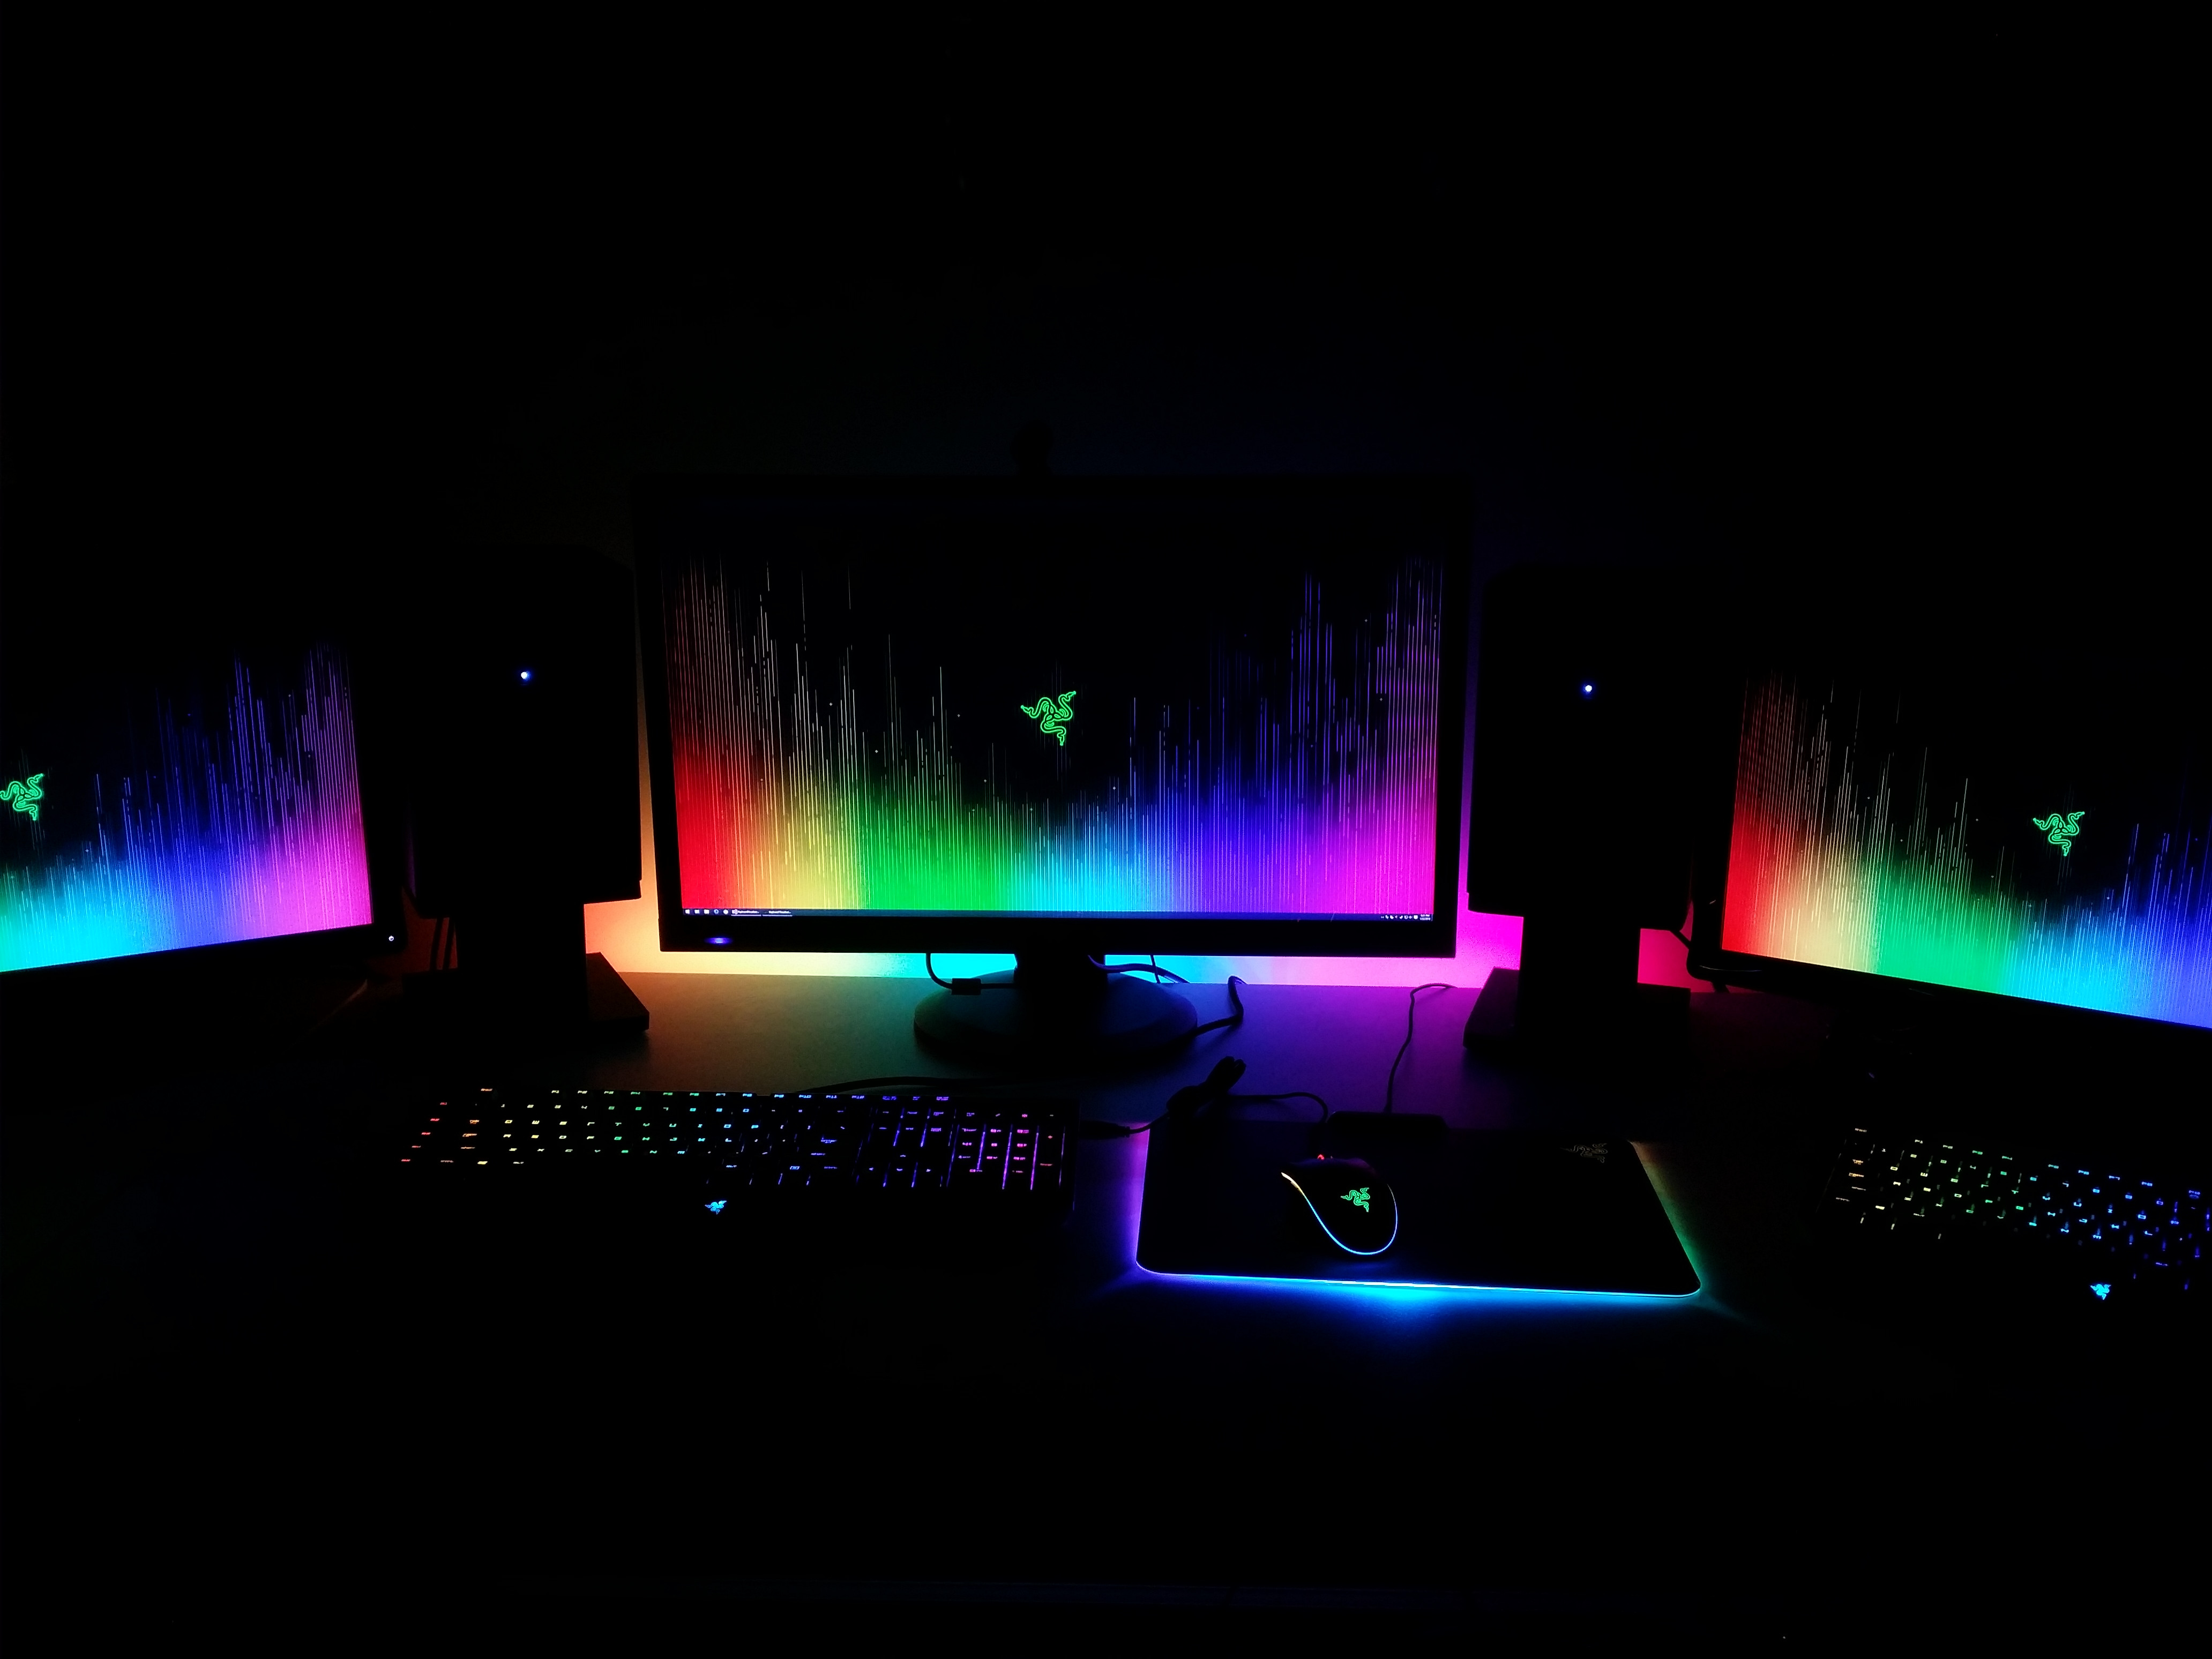 Here's my Chroma setup to go along with the new wallpaper! : razer